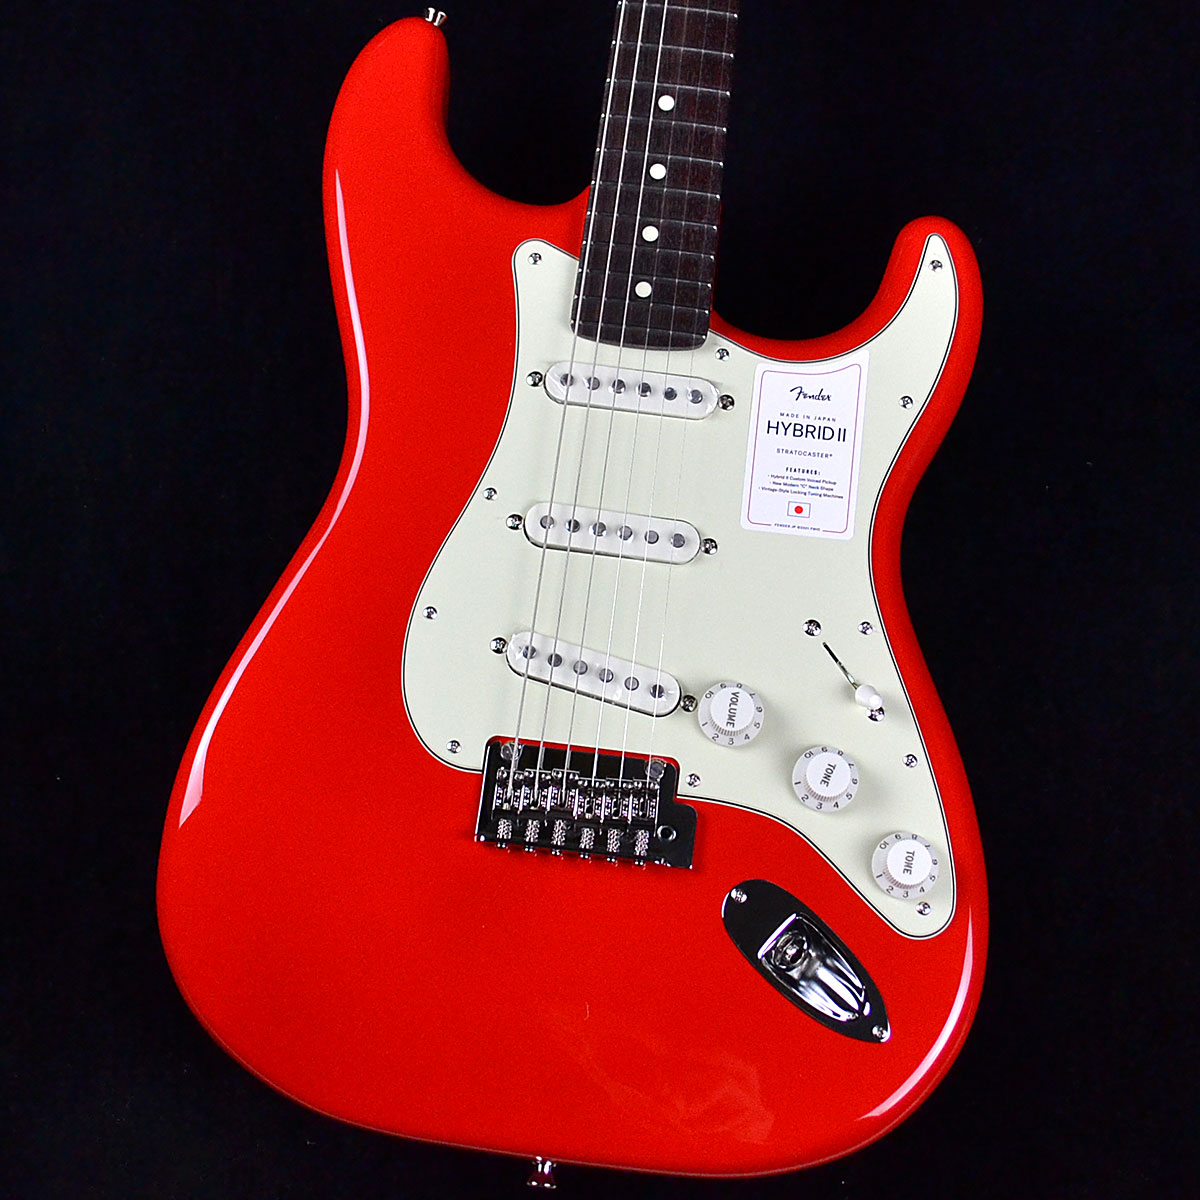 Fender Made In Modena Japan エレキギター Stratocaster Hybrid II